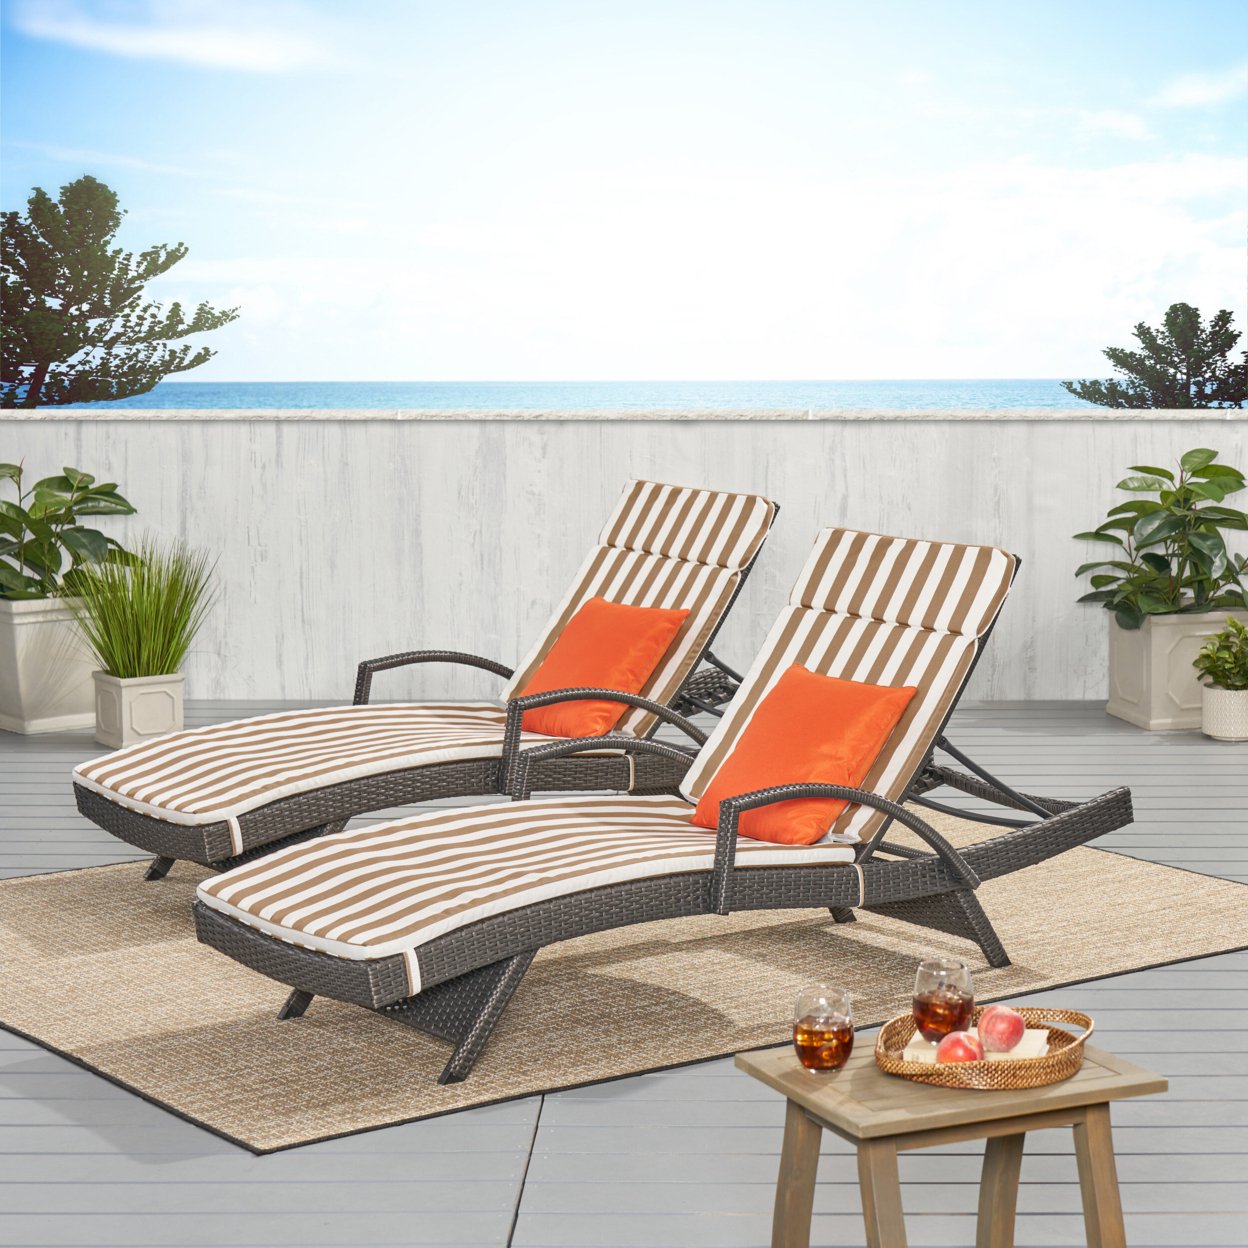 Soleil Outdoor Wicker Chaise Lounges With Water Resistant Cushions (Set Of 2) - Brown & White Stripe